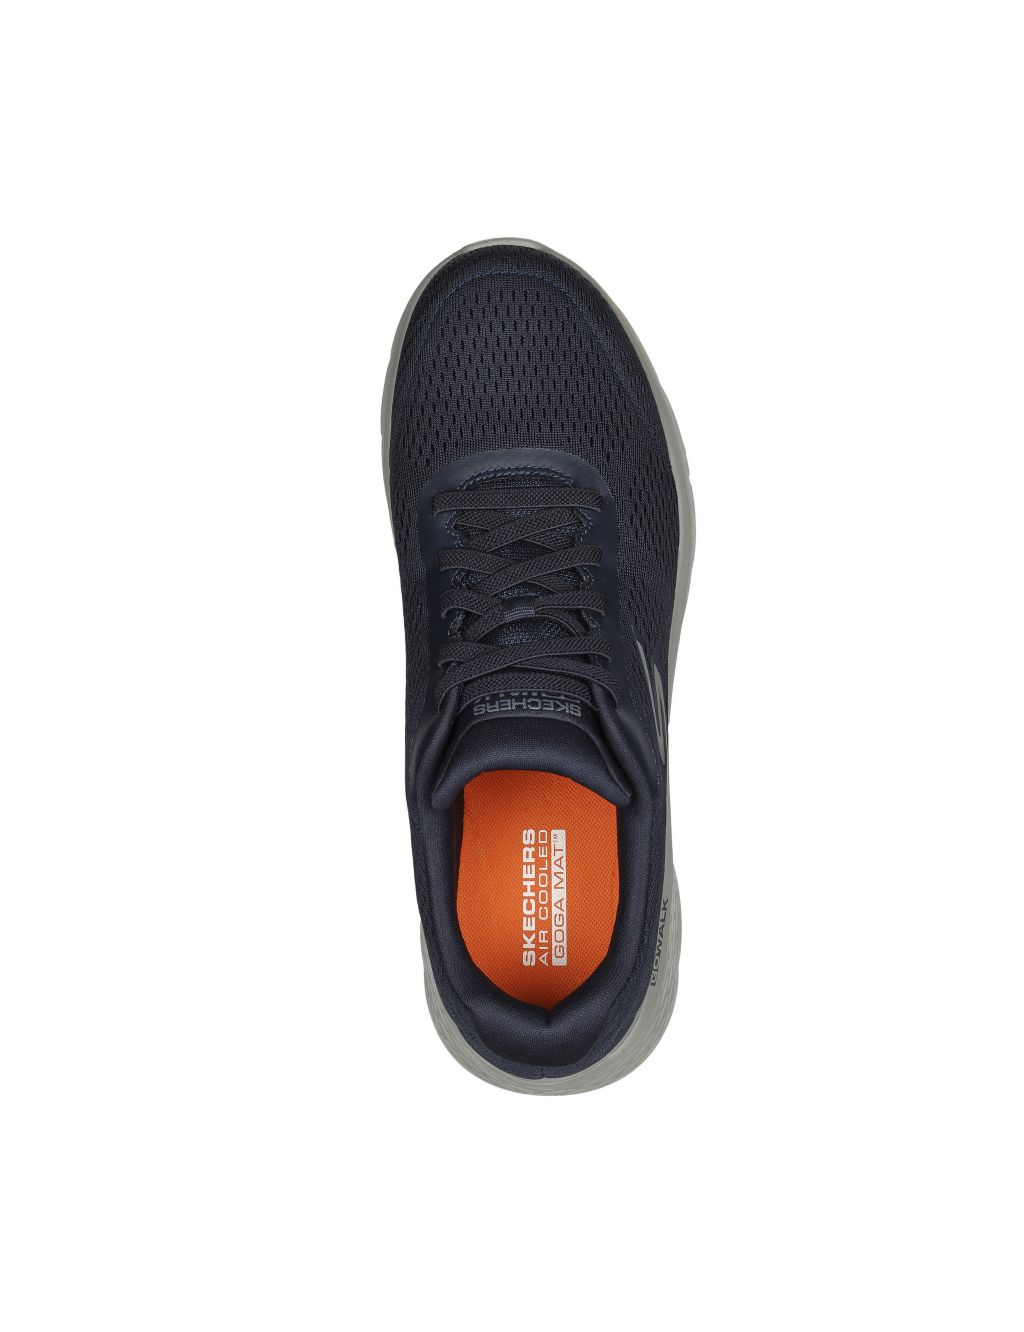 GO WALK Flex Remark Lace Up Trainers image 3